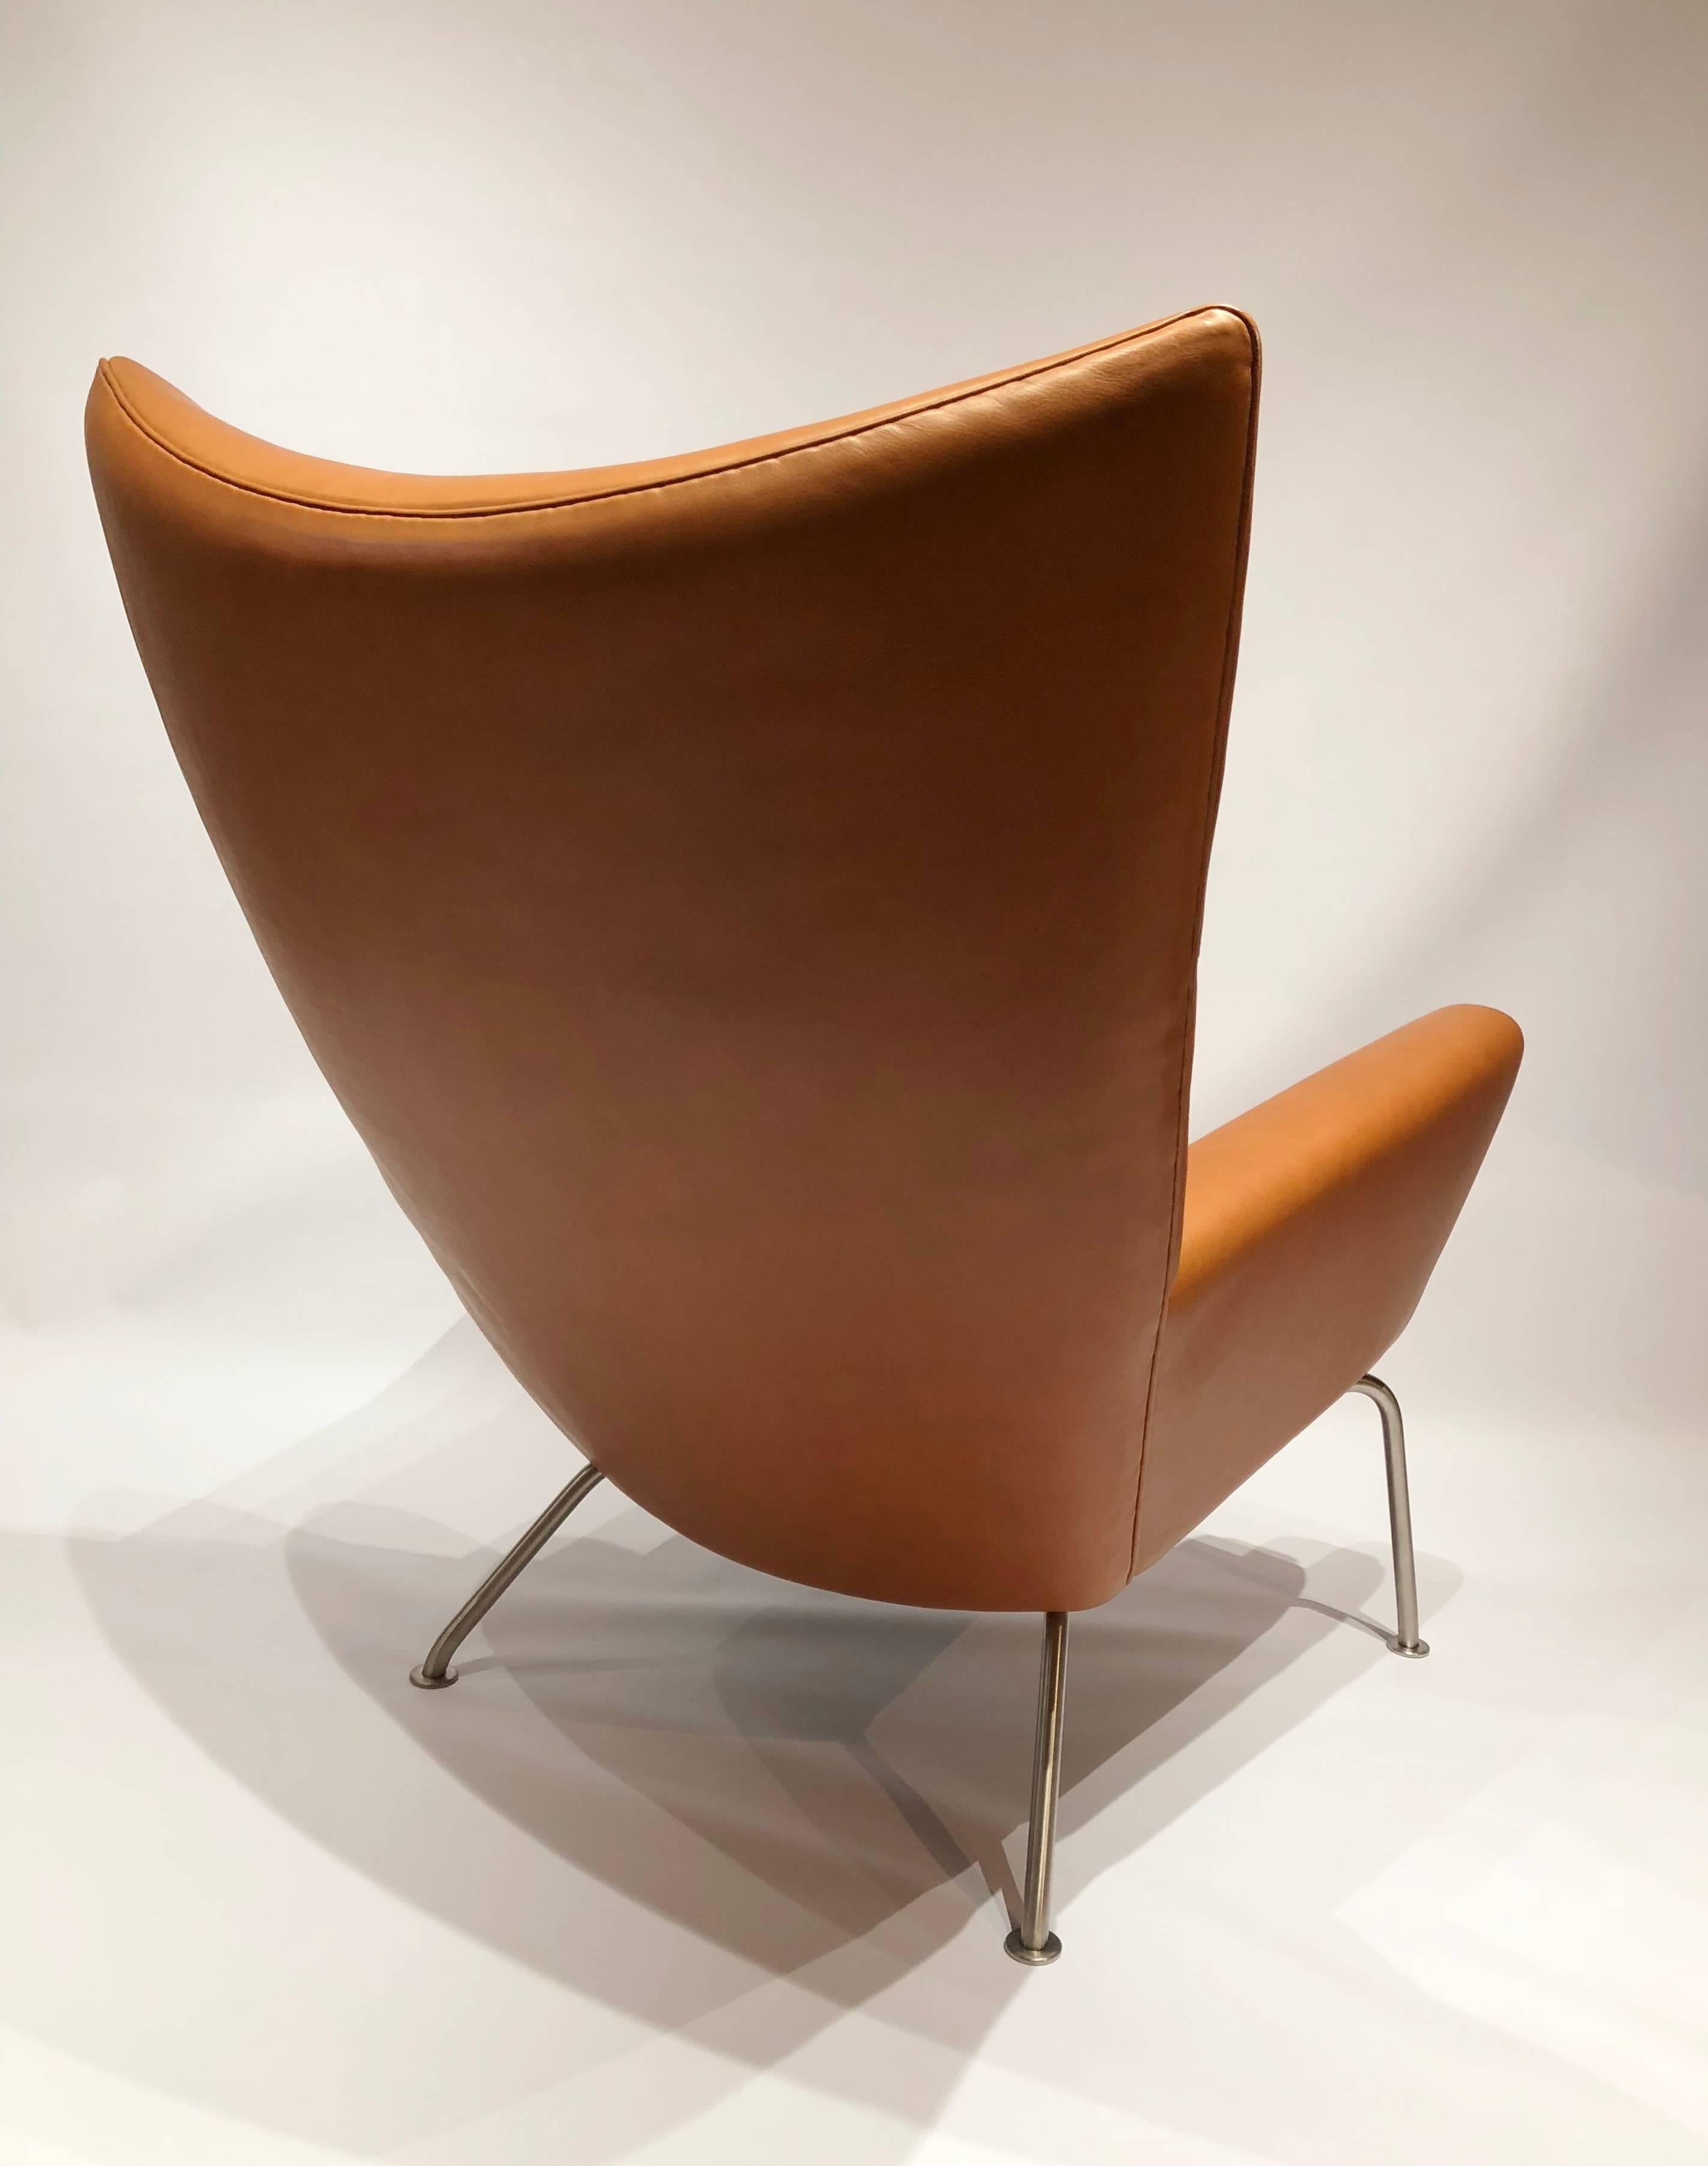 Wingchair, model CH445, in walnut elegance leather designed by Hans J. Wegner in 1960 and manufactured by Carl Hansen and Son.